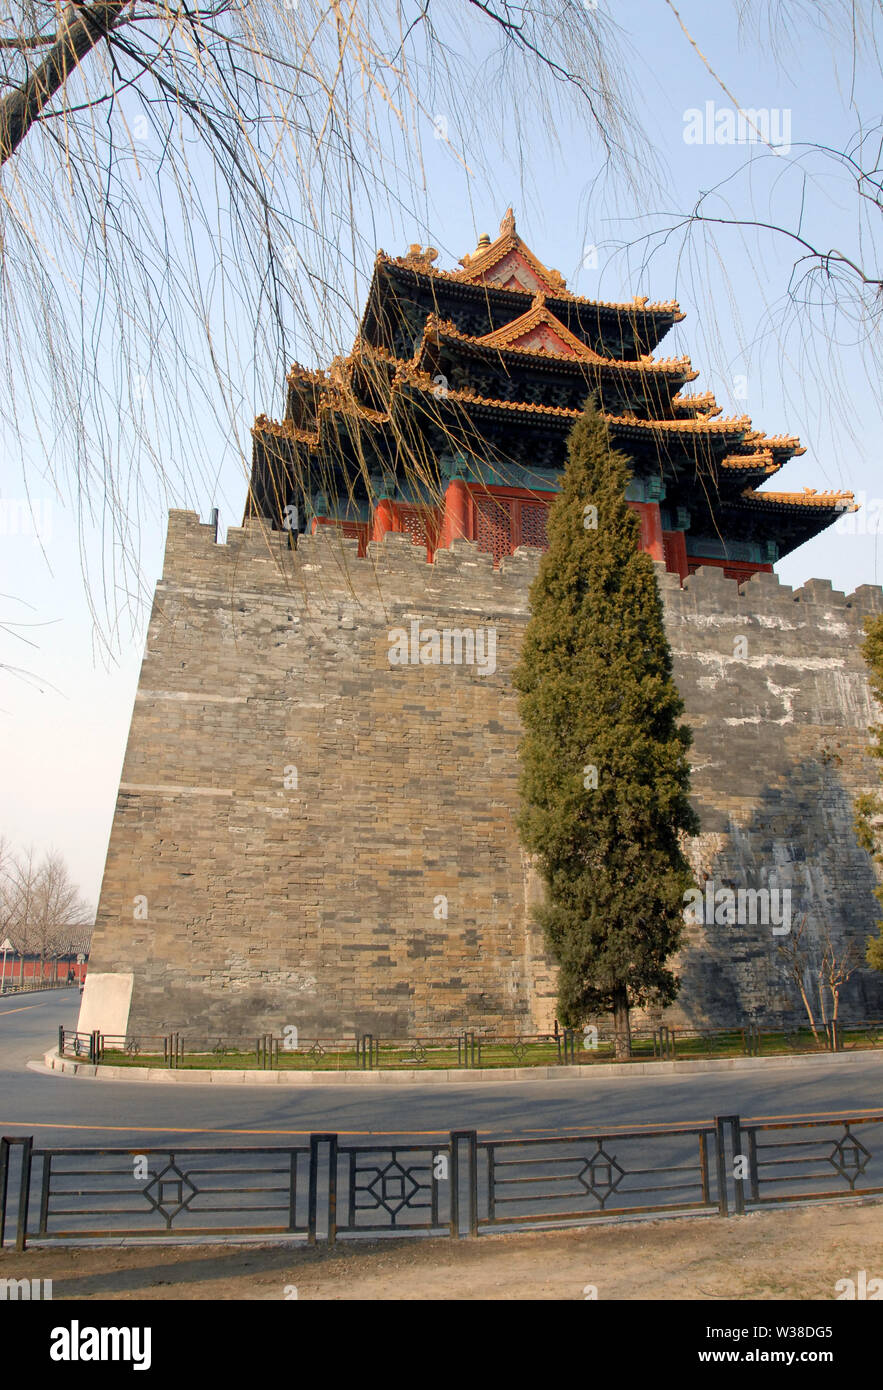 Forbidden City, Beijing, China. A corner tower seen from outside the Forbidden City. The Forbidden City has traditional Chinese architecture. UNESCO. Stock Photo